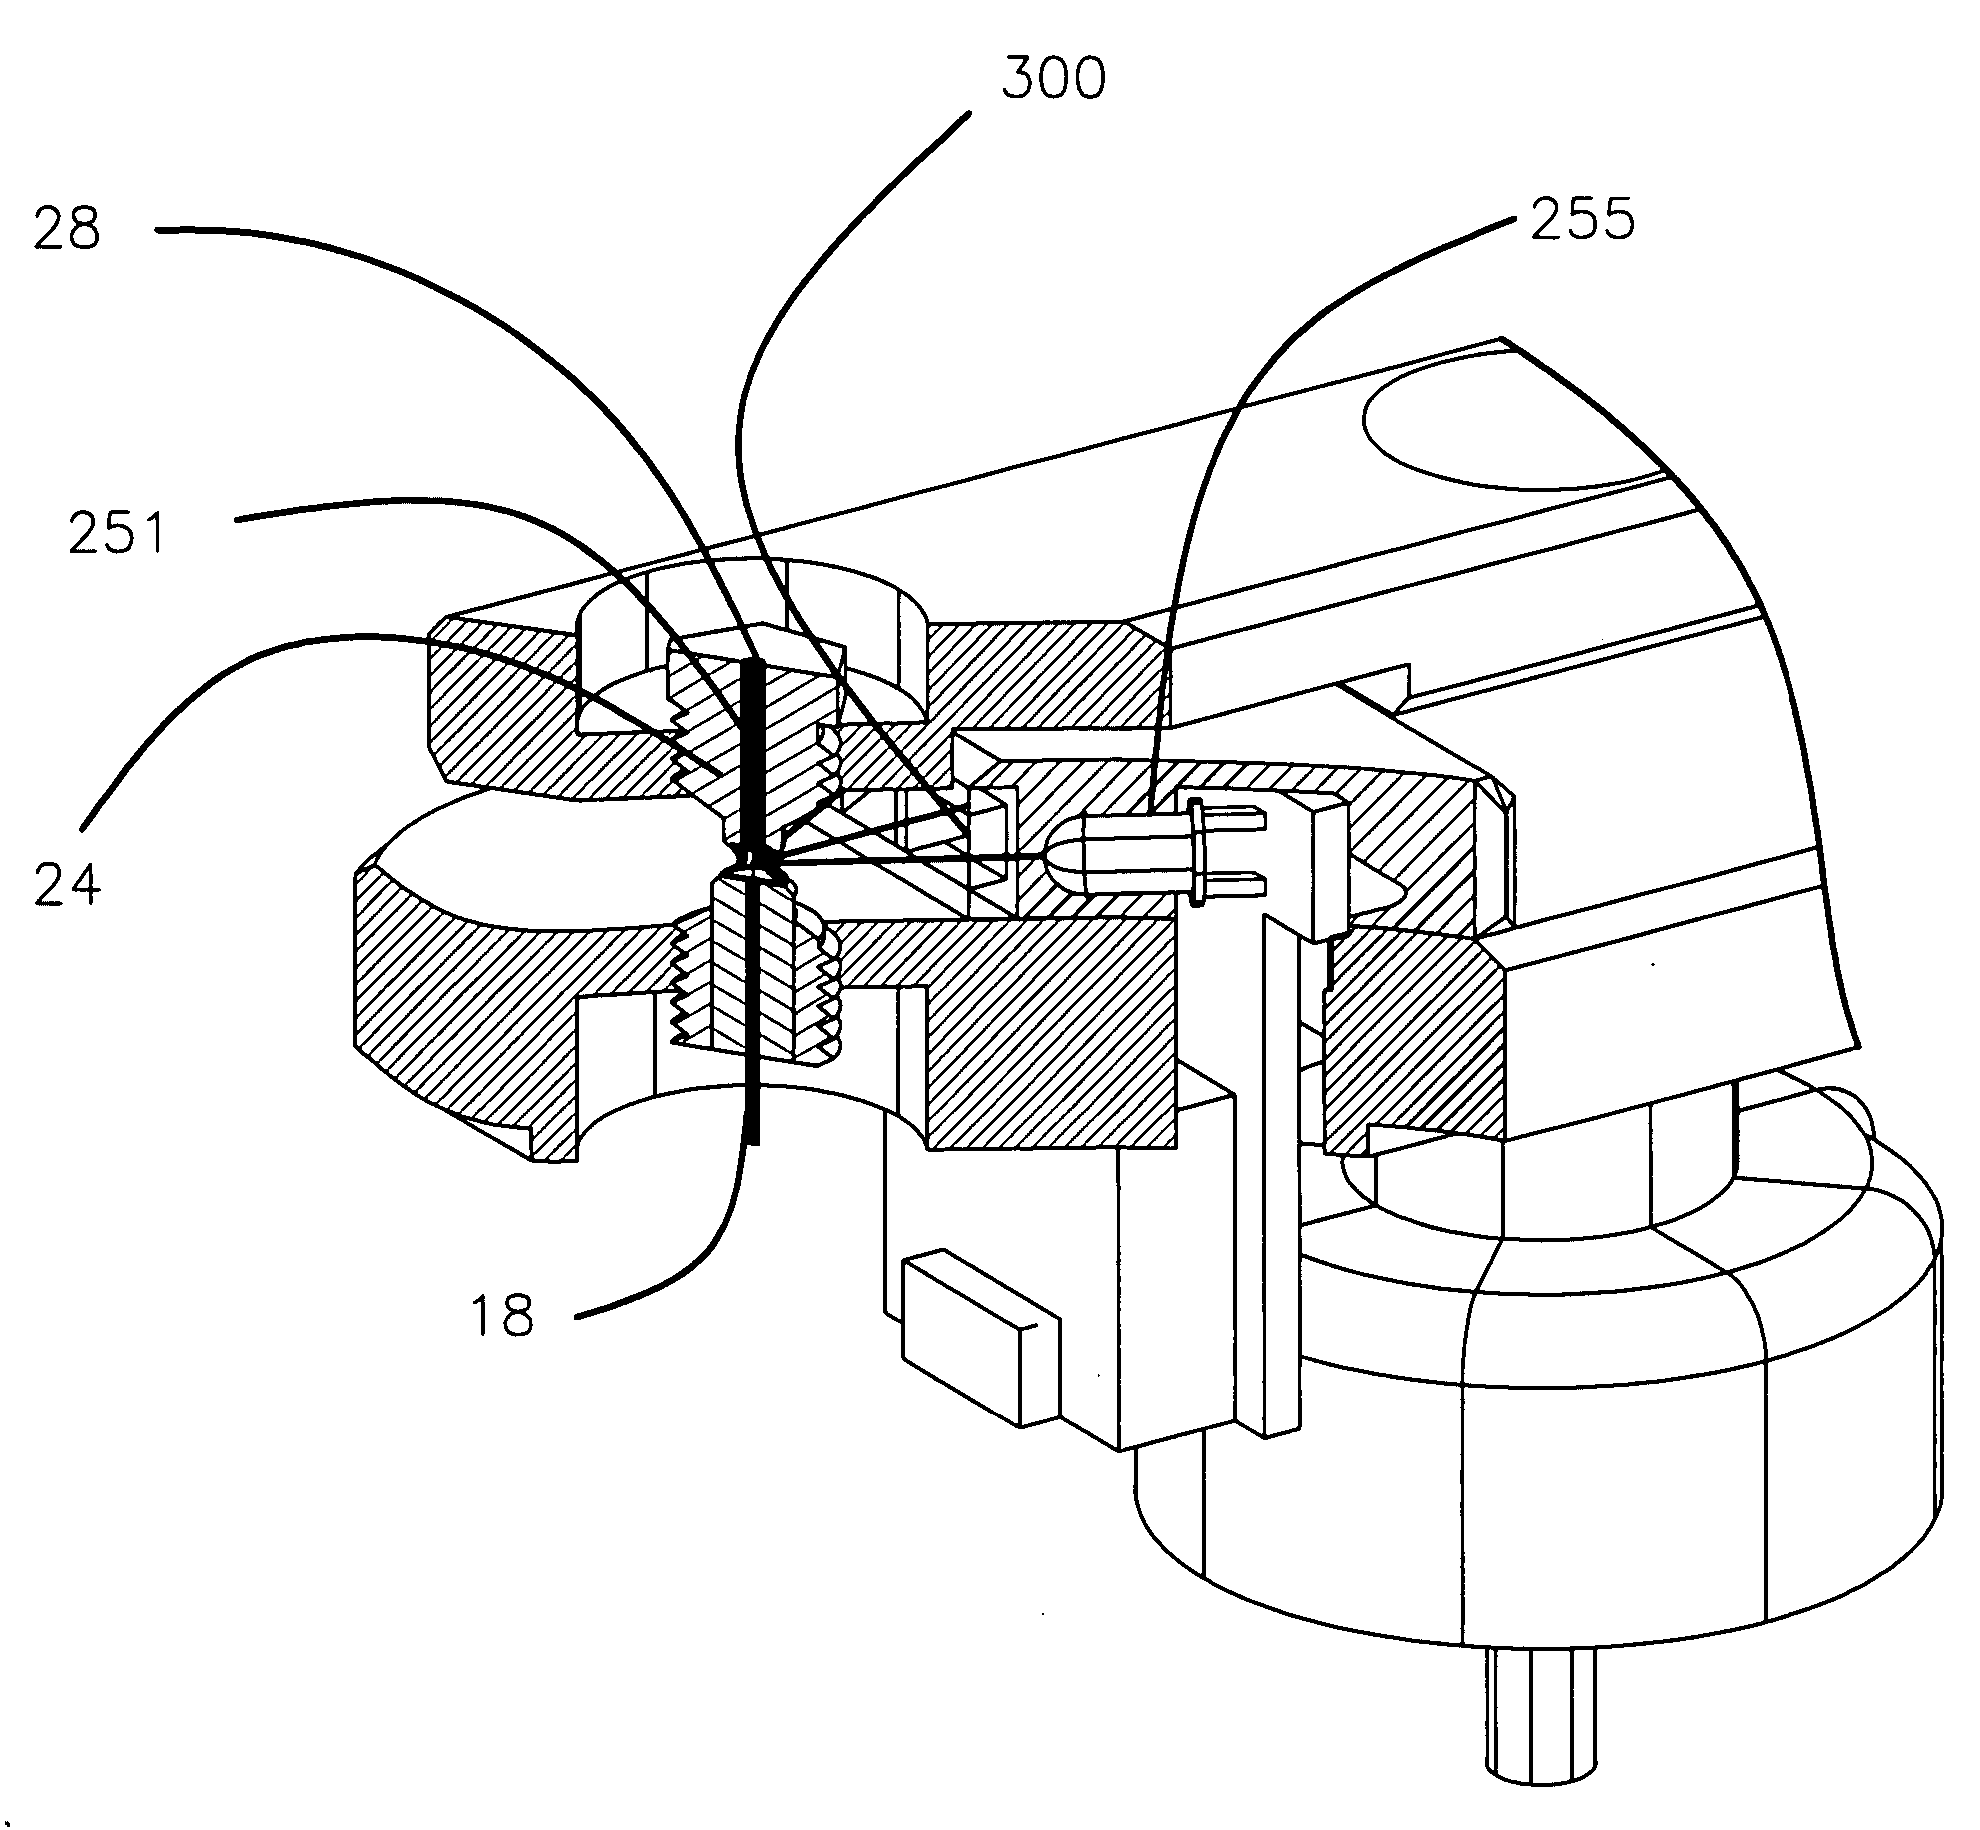 Apparatus and method for measuring the signal from a fluorescing nanodrop contained by surface tension